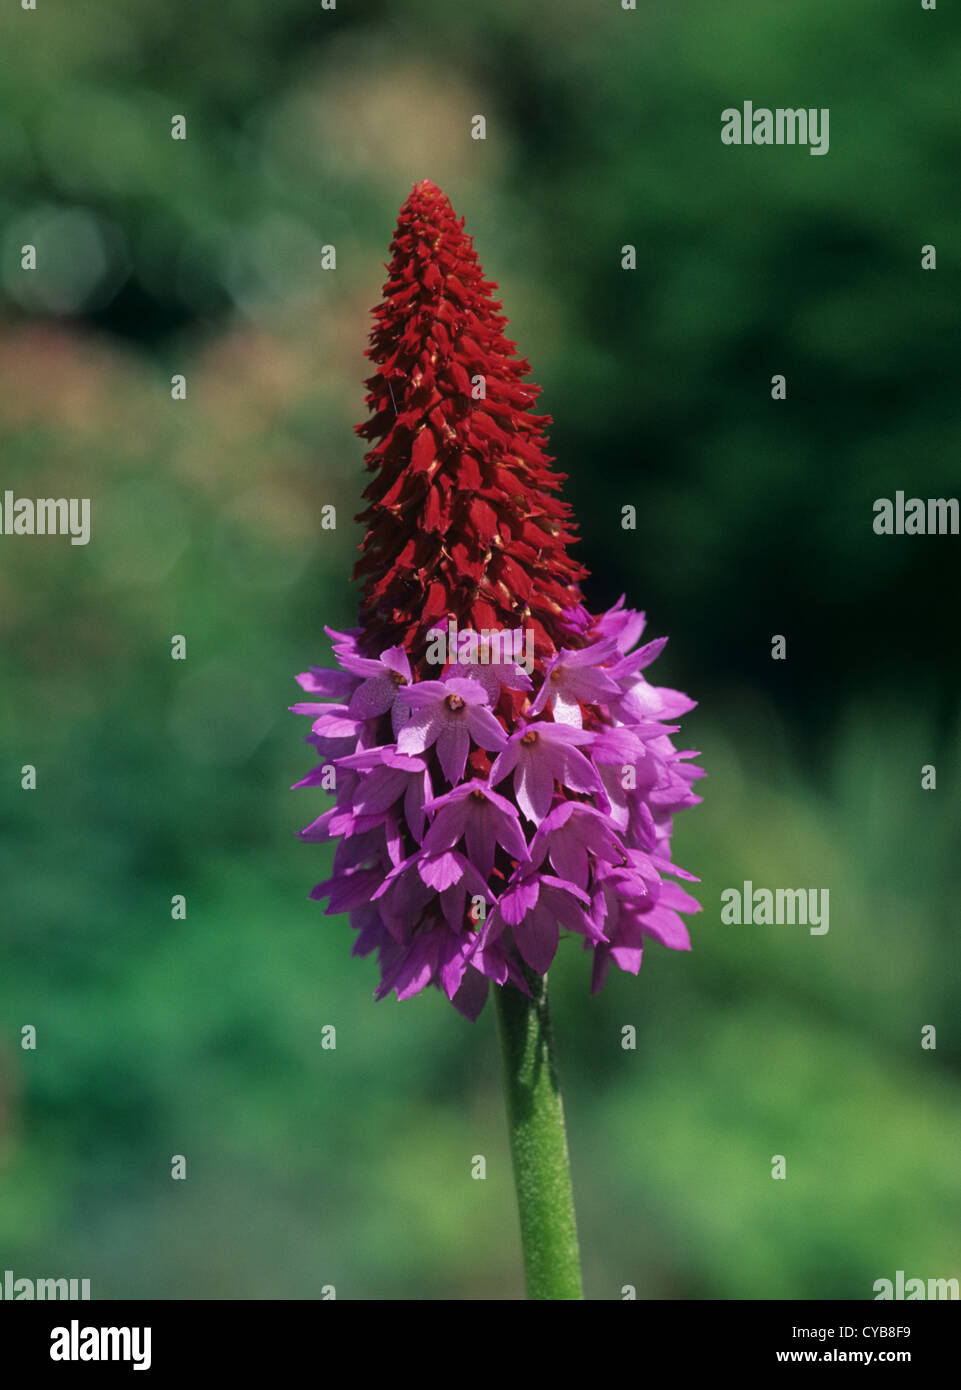 Red & purple Primula vialli flower spike with half the florets open Stock Photo